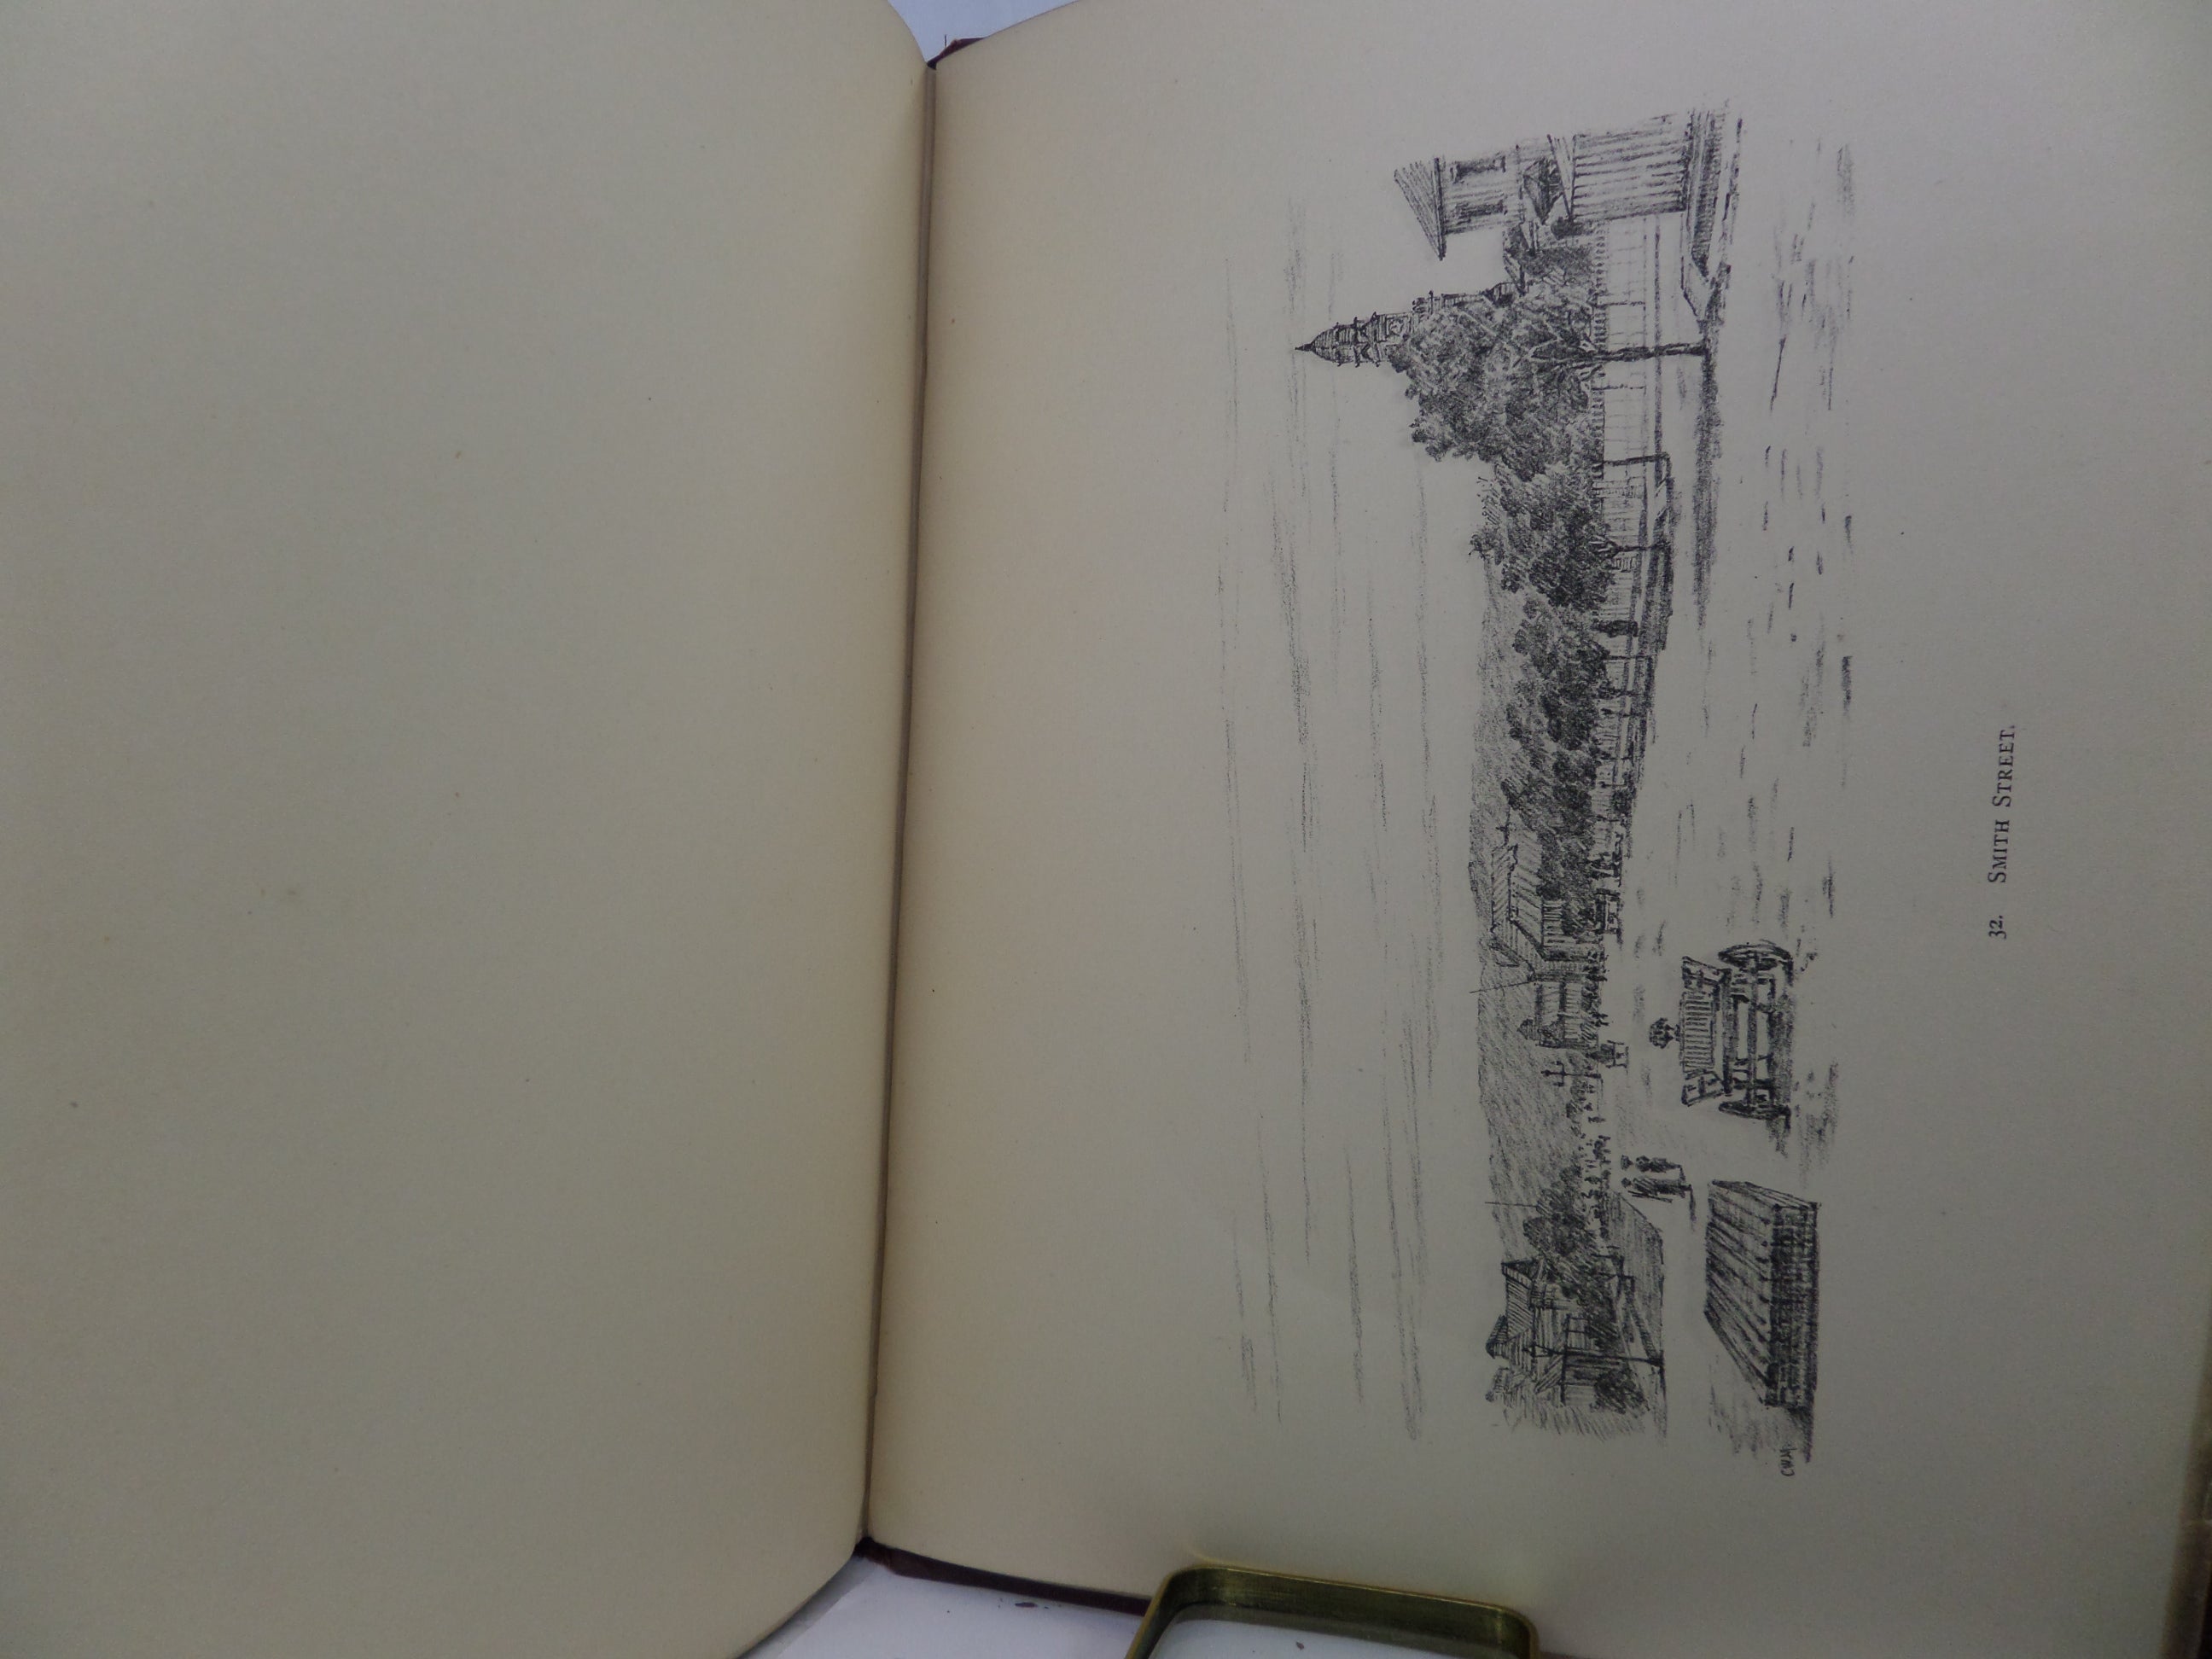 SKETCHES OF DURBAN AND ITS HARBOUR IN 1891 BY CATHCART W. METHUEN, FIRST EDITION